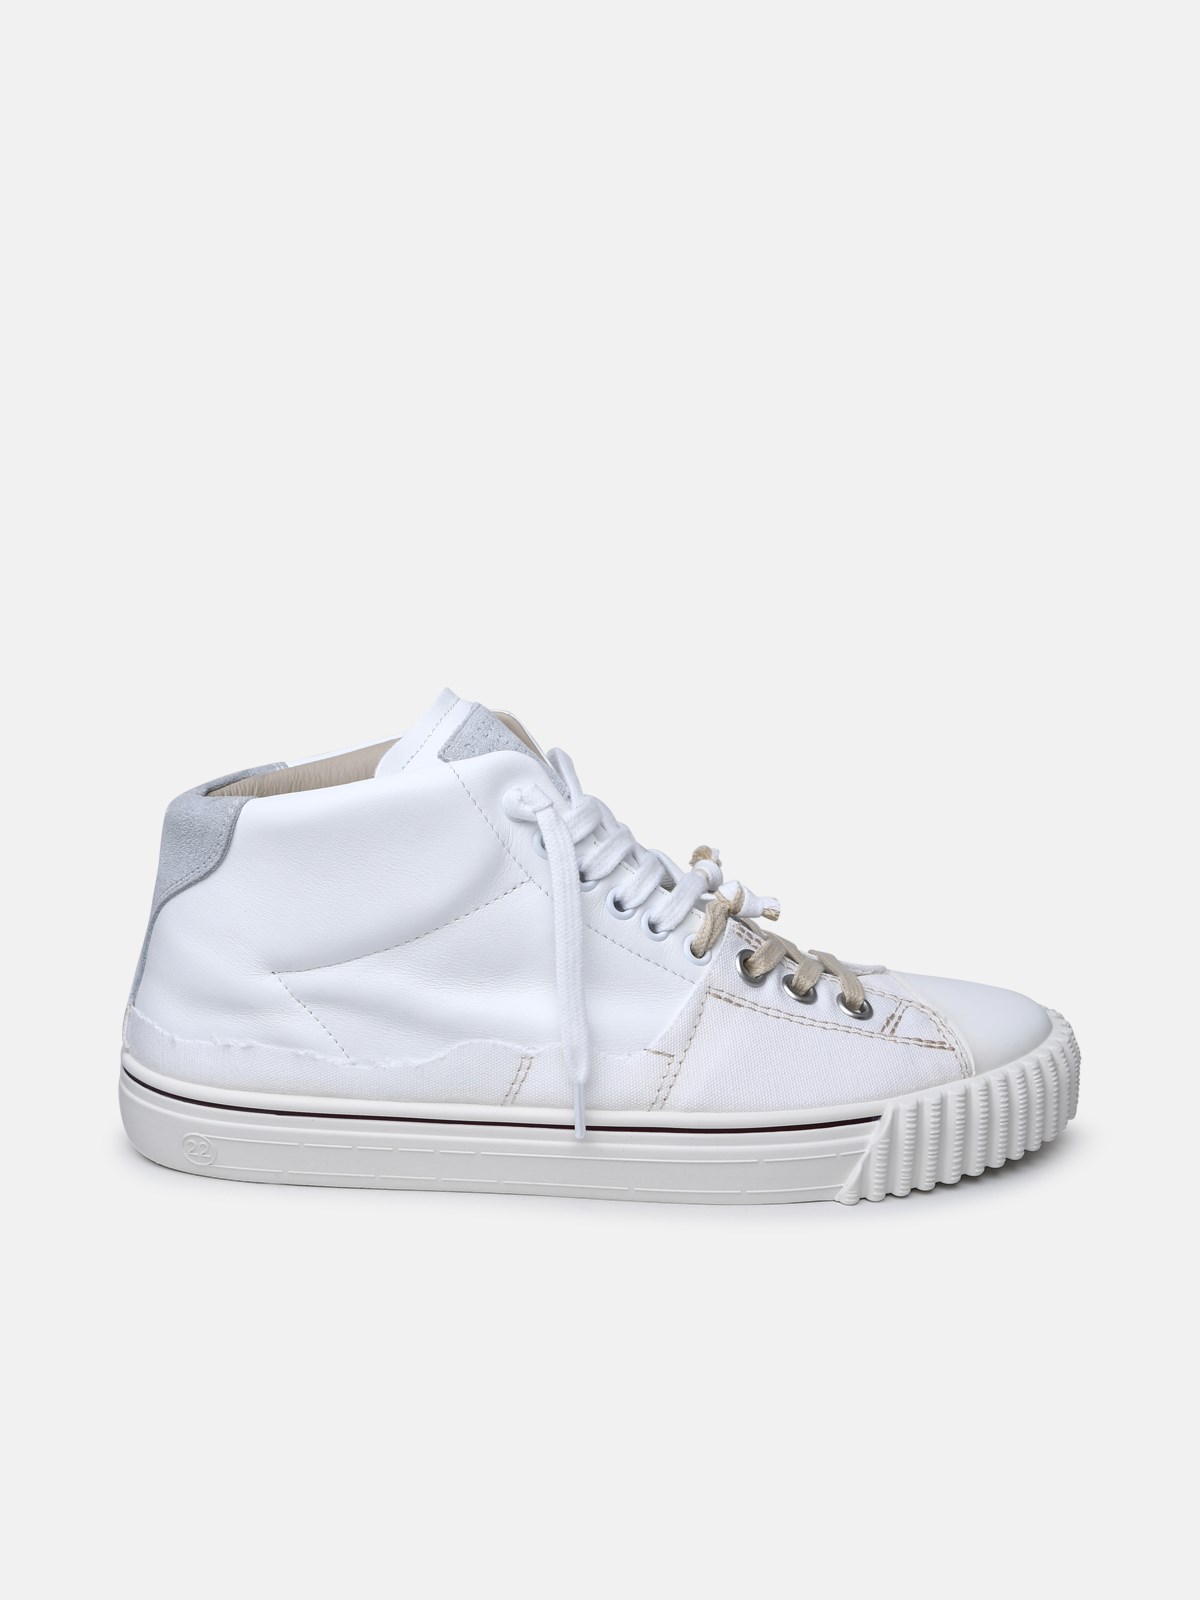 Maison Margiela Leather Blend Sneakers In White